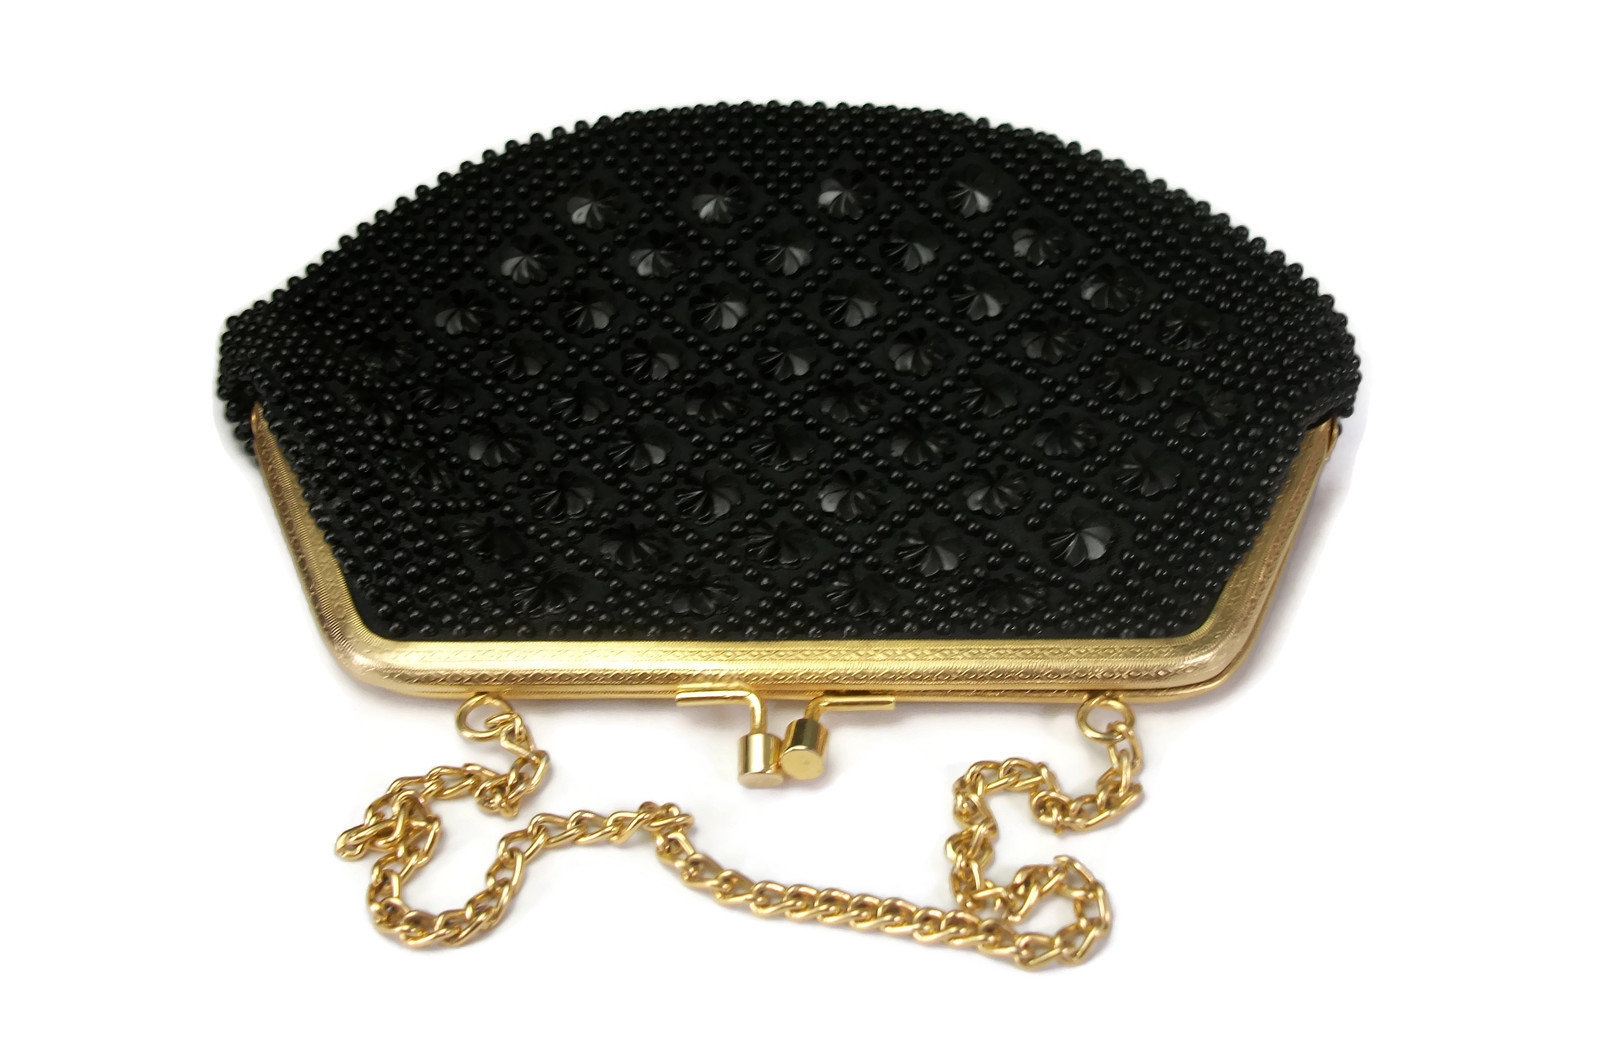 Vintage Black Beaded Evening Purse Clutch Gold Chain Link Safety